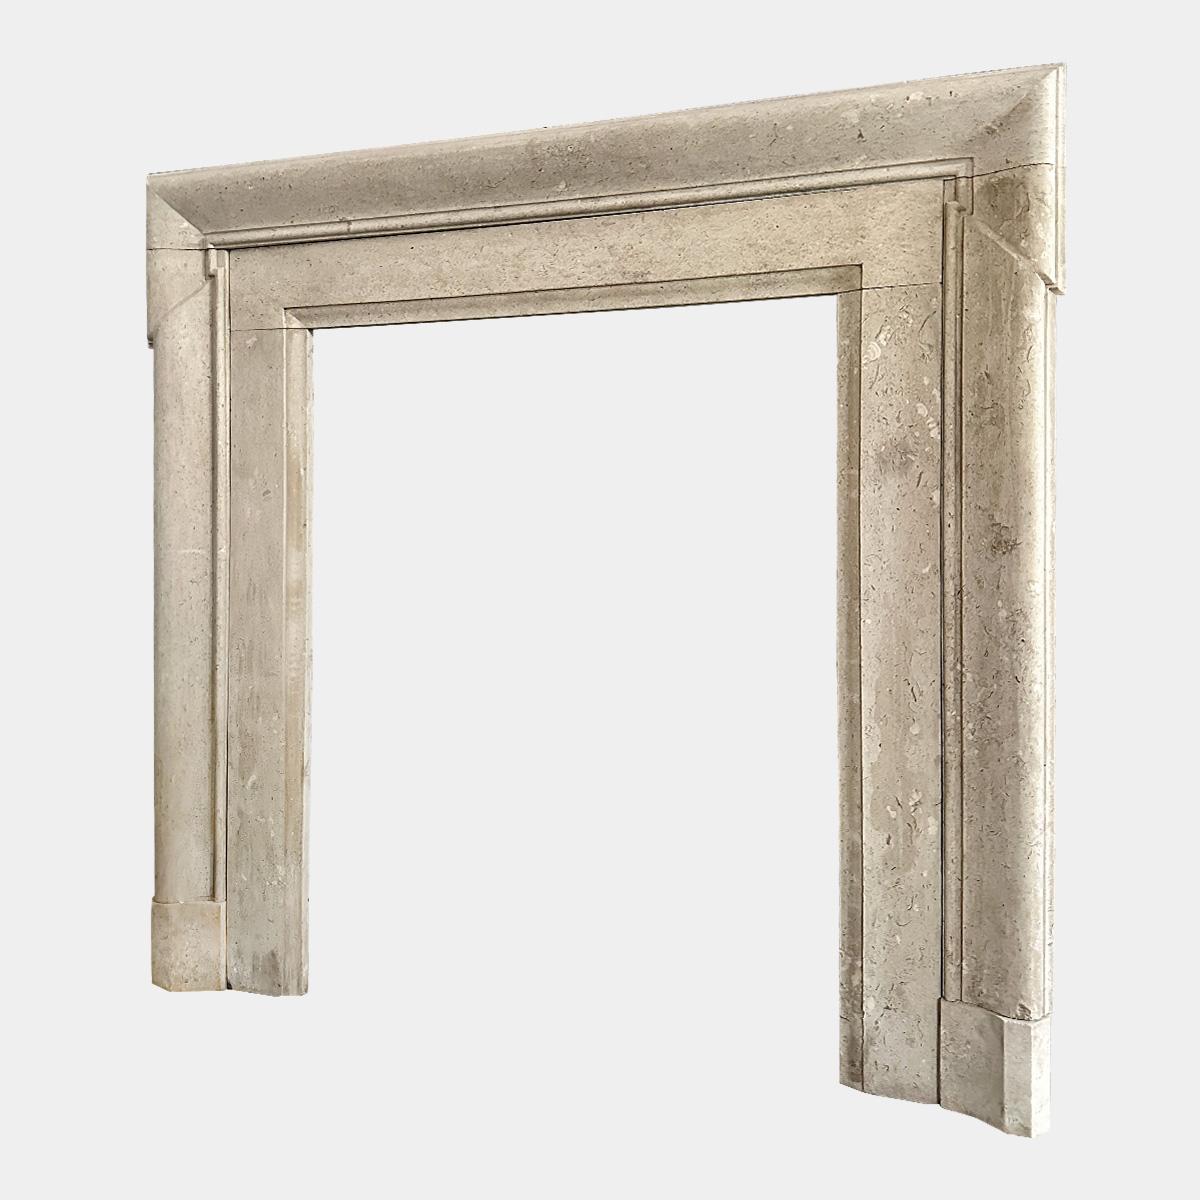 An 18th Century Architectural English Stone Bolection Fireplace Mantel  In Good Condition For Sale In London, GB